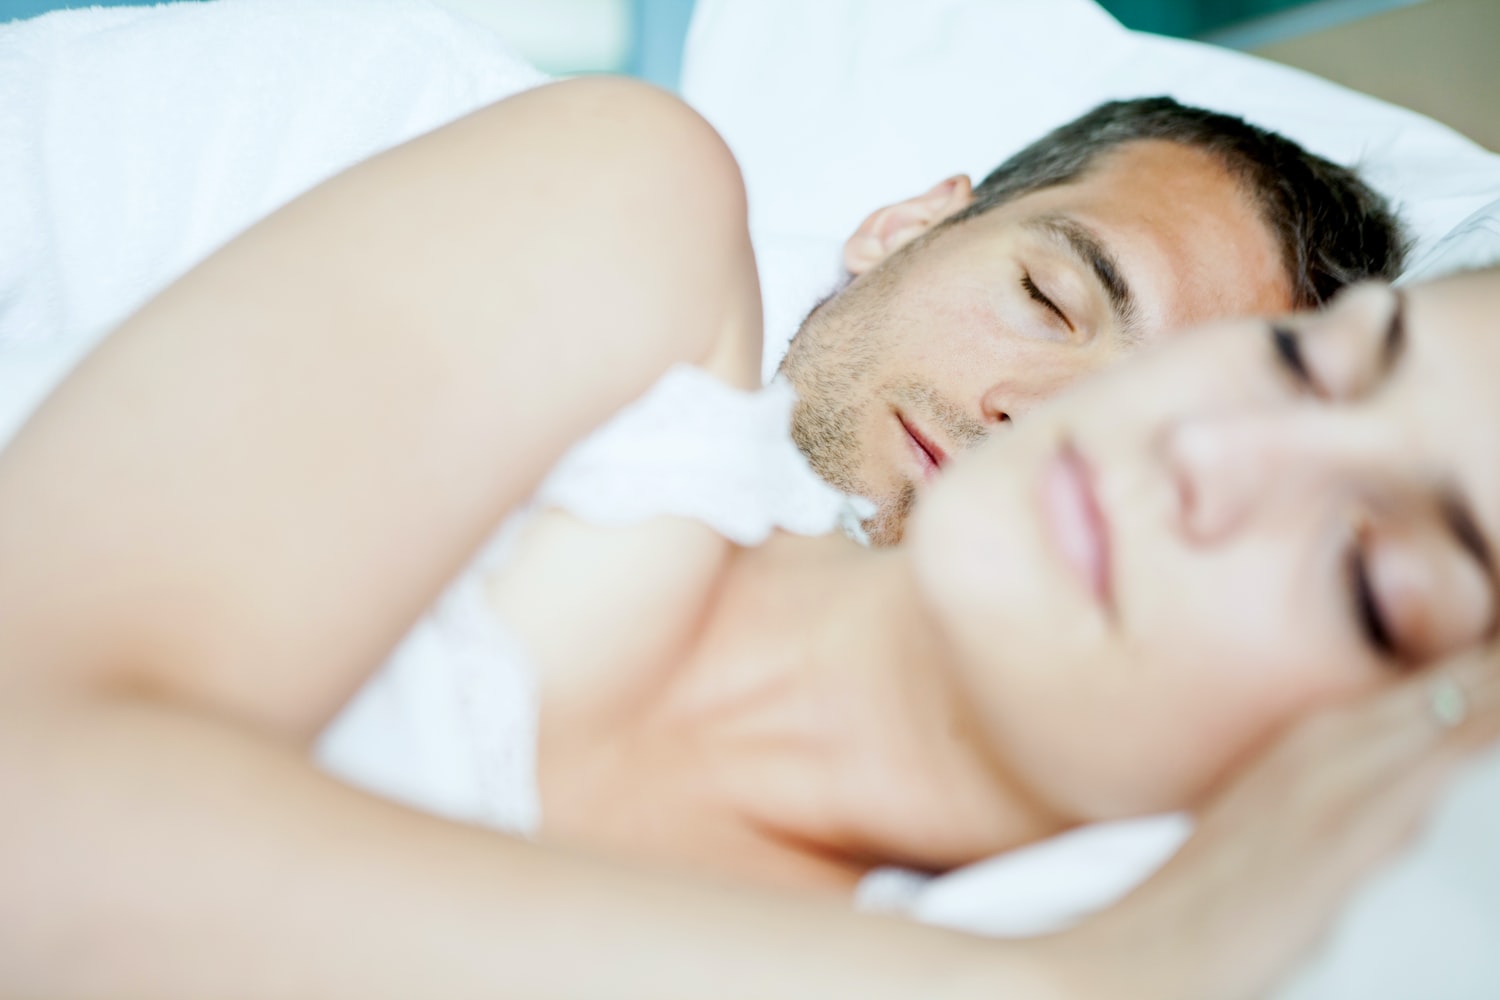 Man and women lying in bed spooning